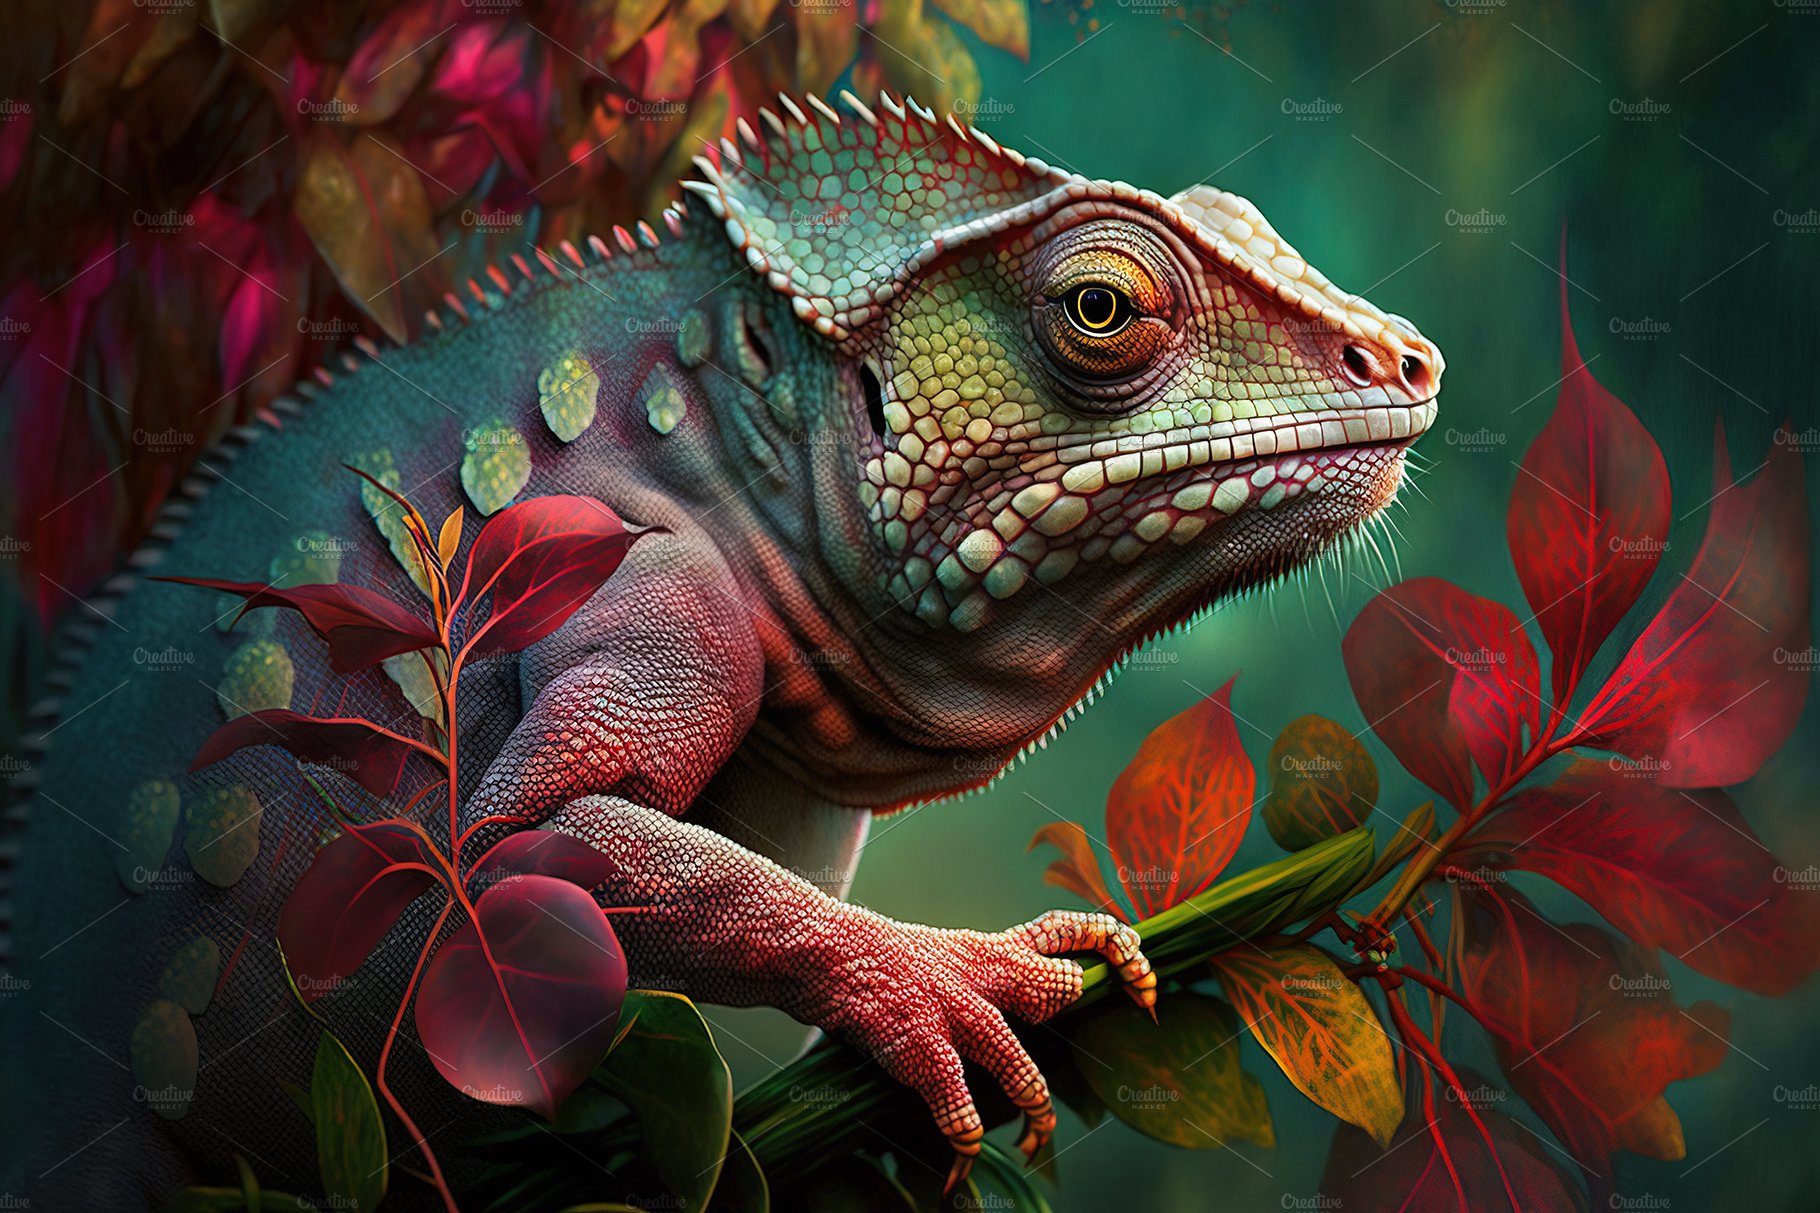 Brightly colored chameleon. Reptile. cover image.